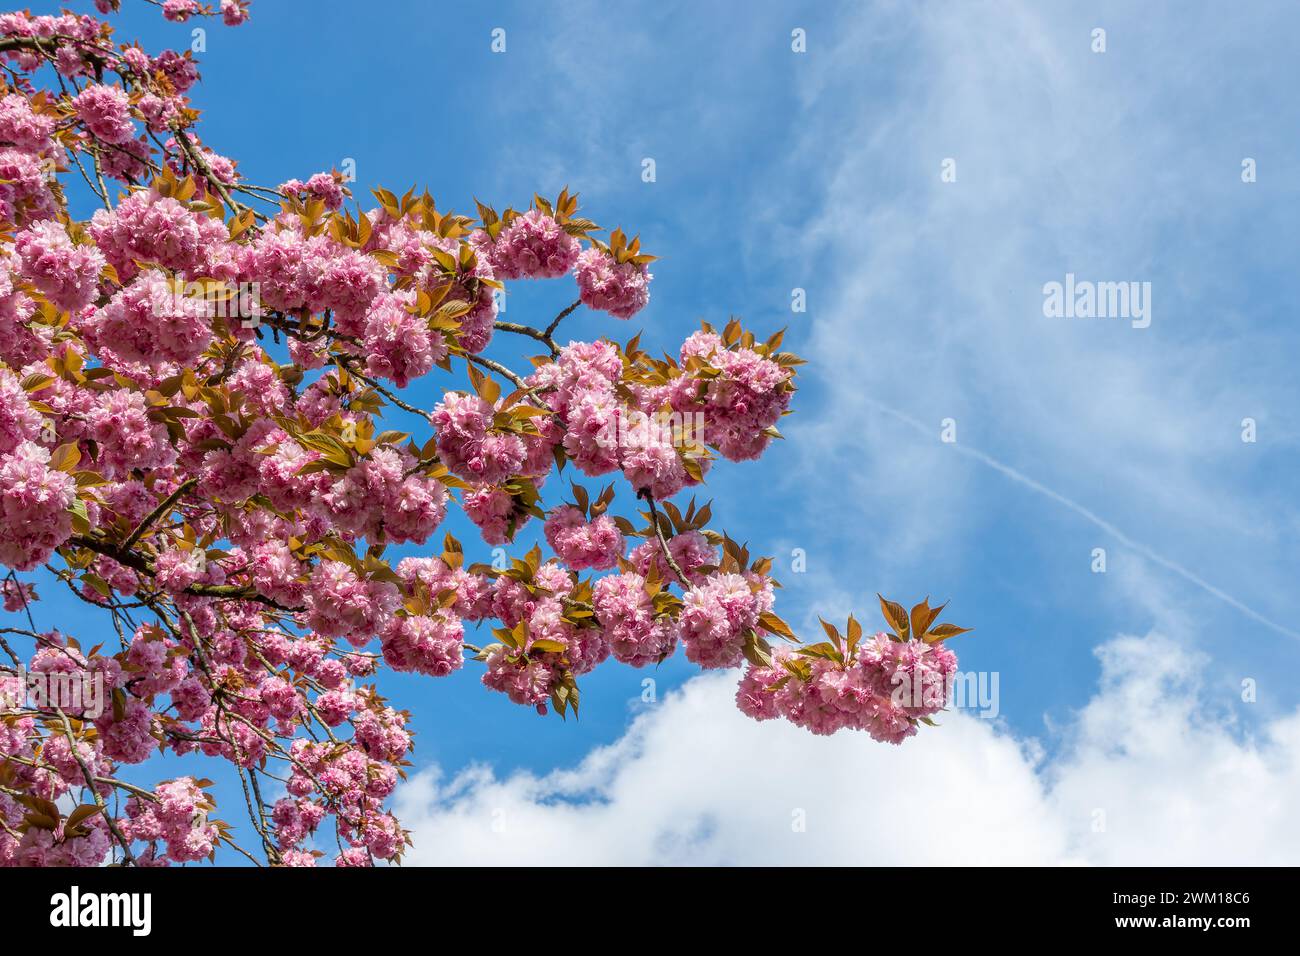 Branch of pink cherry tree in bloom on blue sky background, cherry blossom in spring, hanami season in Japan Stock Photo